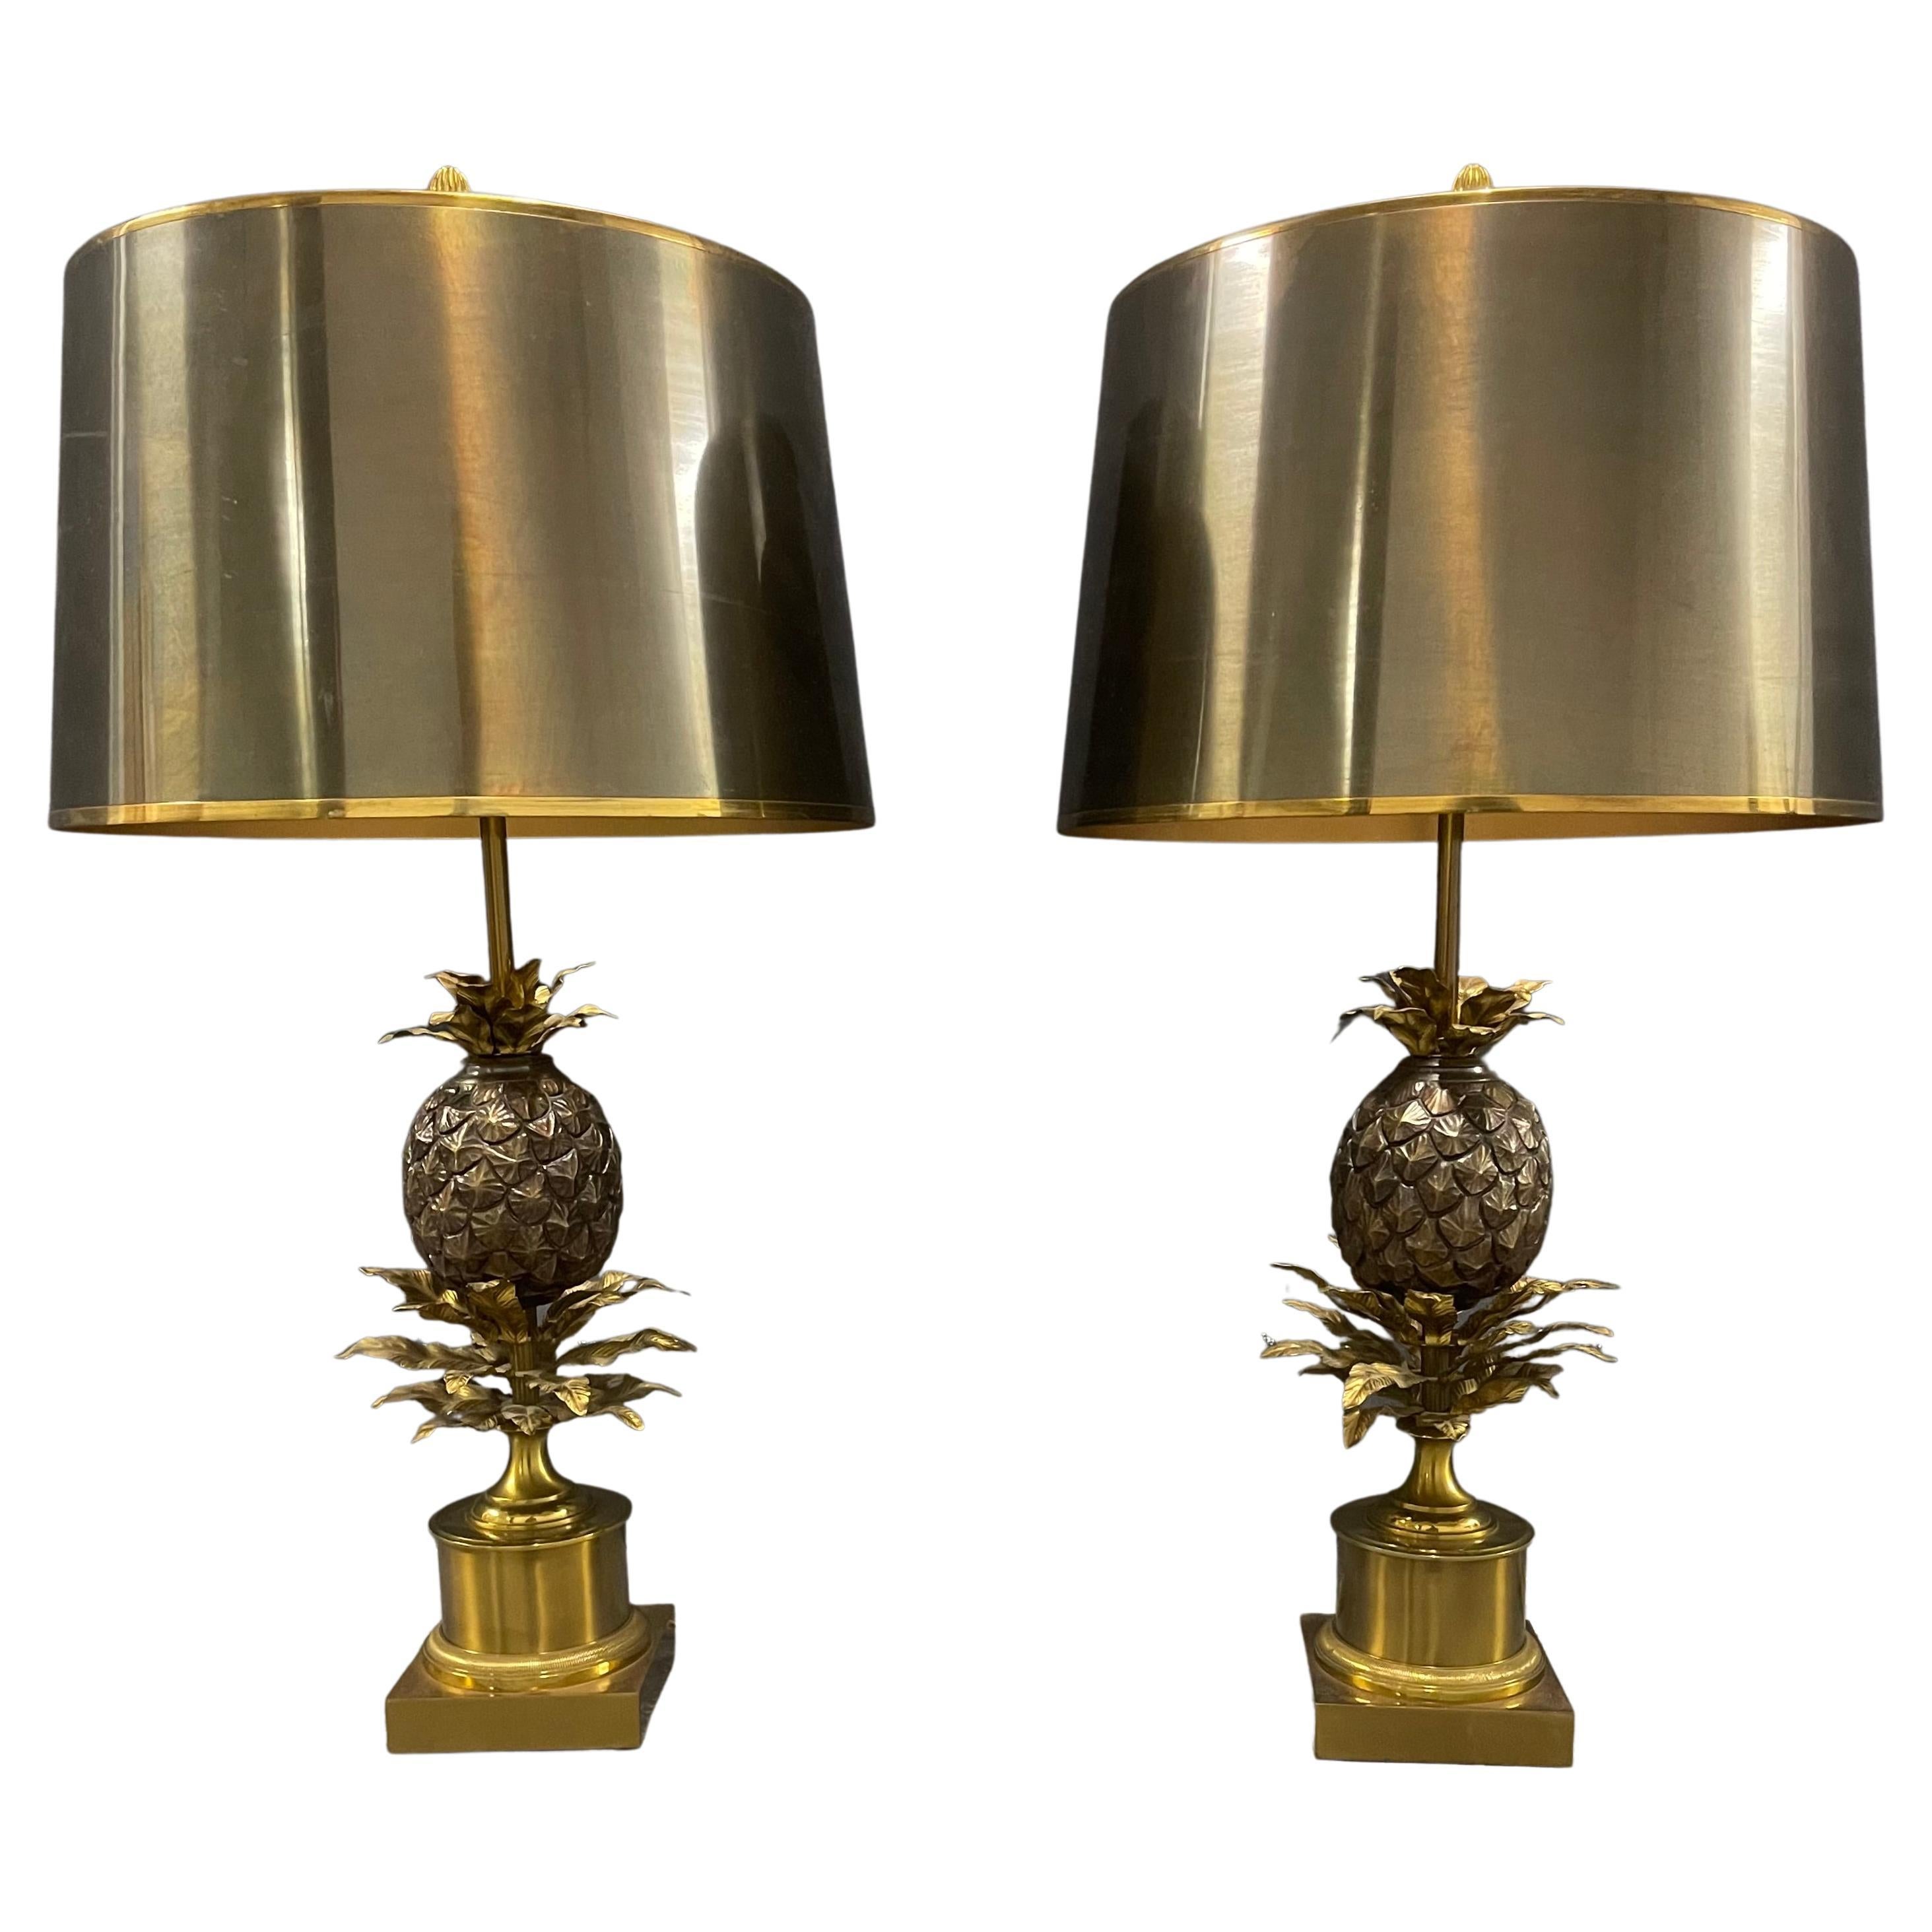 Very Exclusive, Iconic and Awesome Pair of Maison Charles Pineapple Lamps For Sale